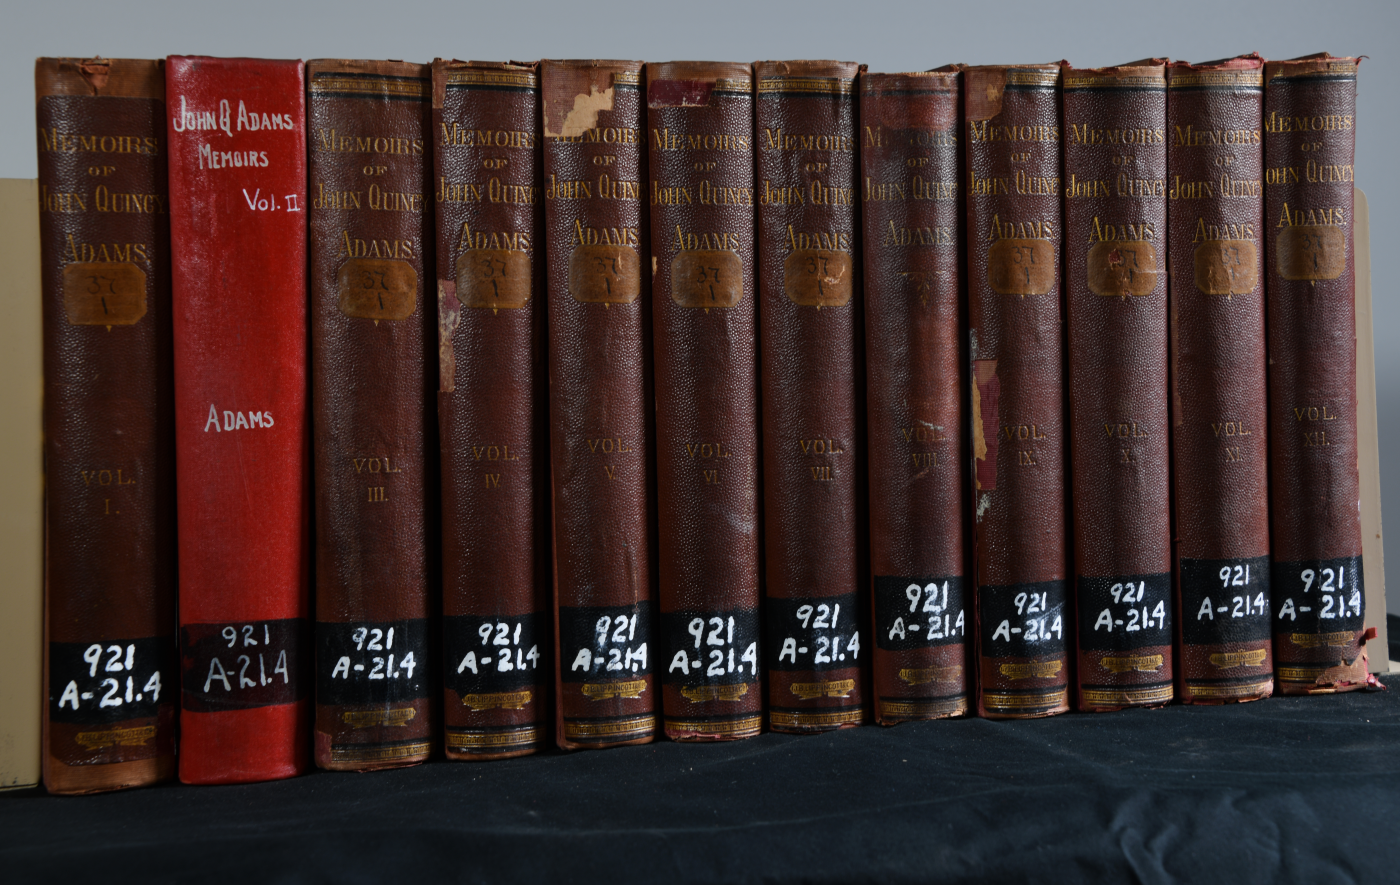 The 12-volume series of the memoirs of John Q. Adams, as they appear in our archival collection. These books too show evidence of repair, perhaps by Helen herself.